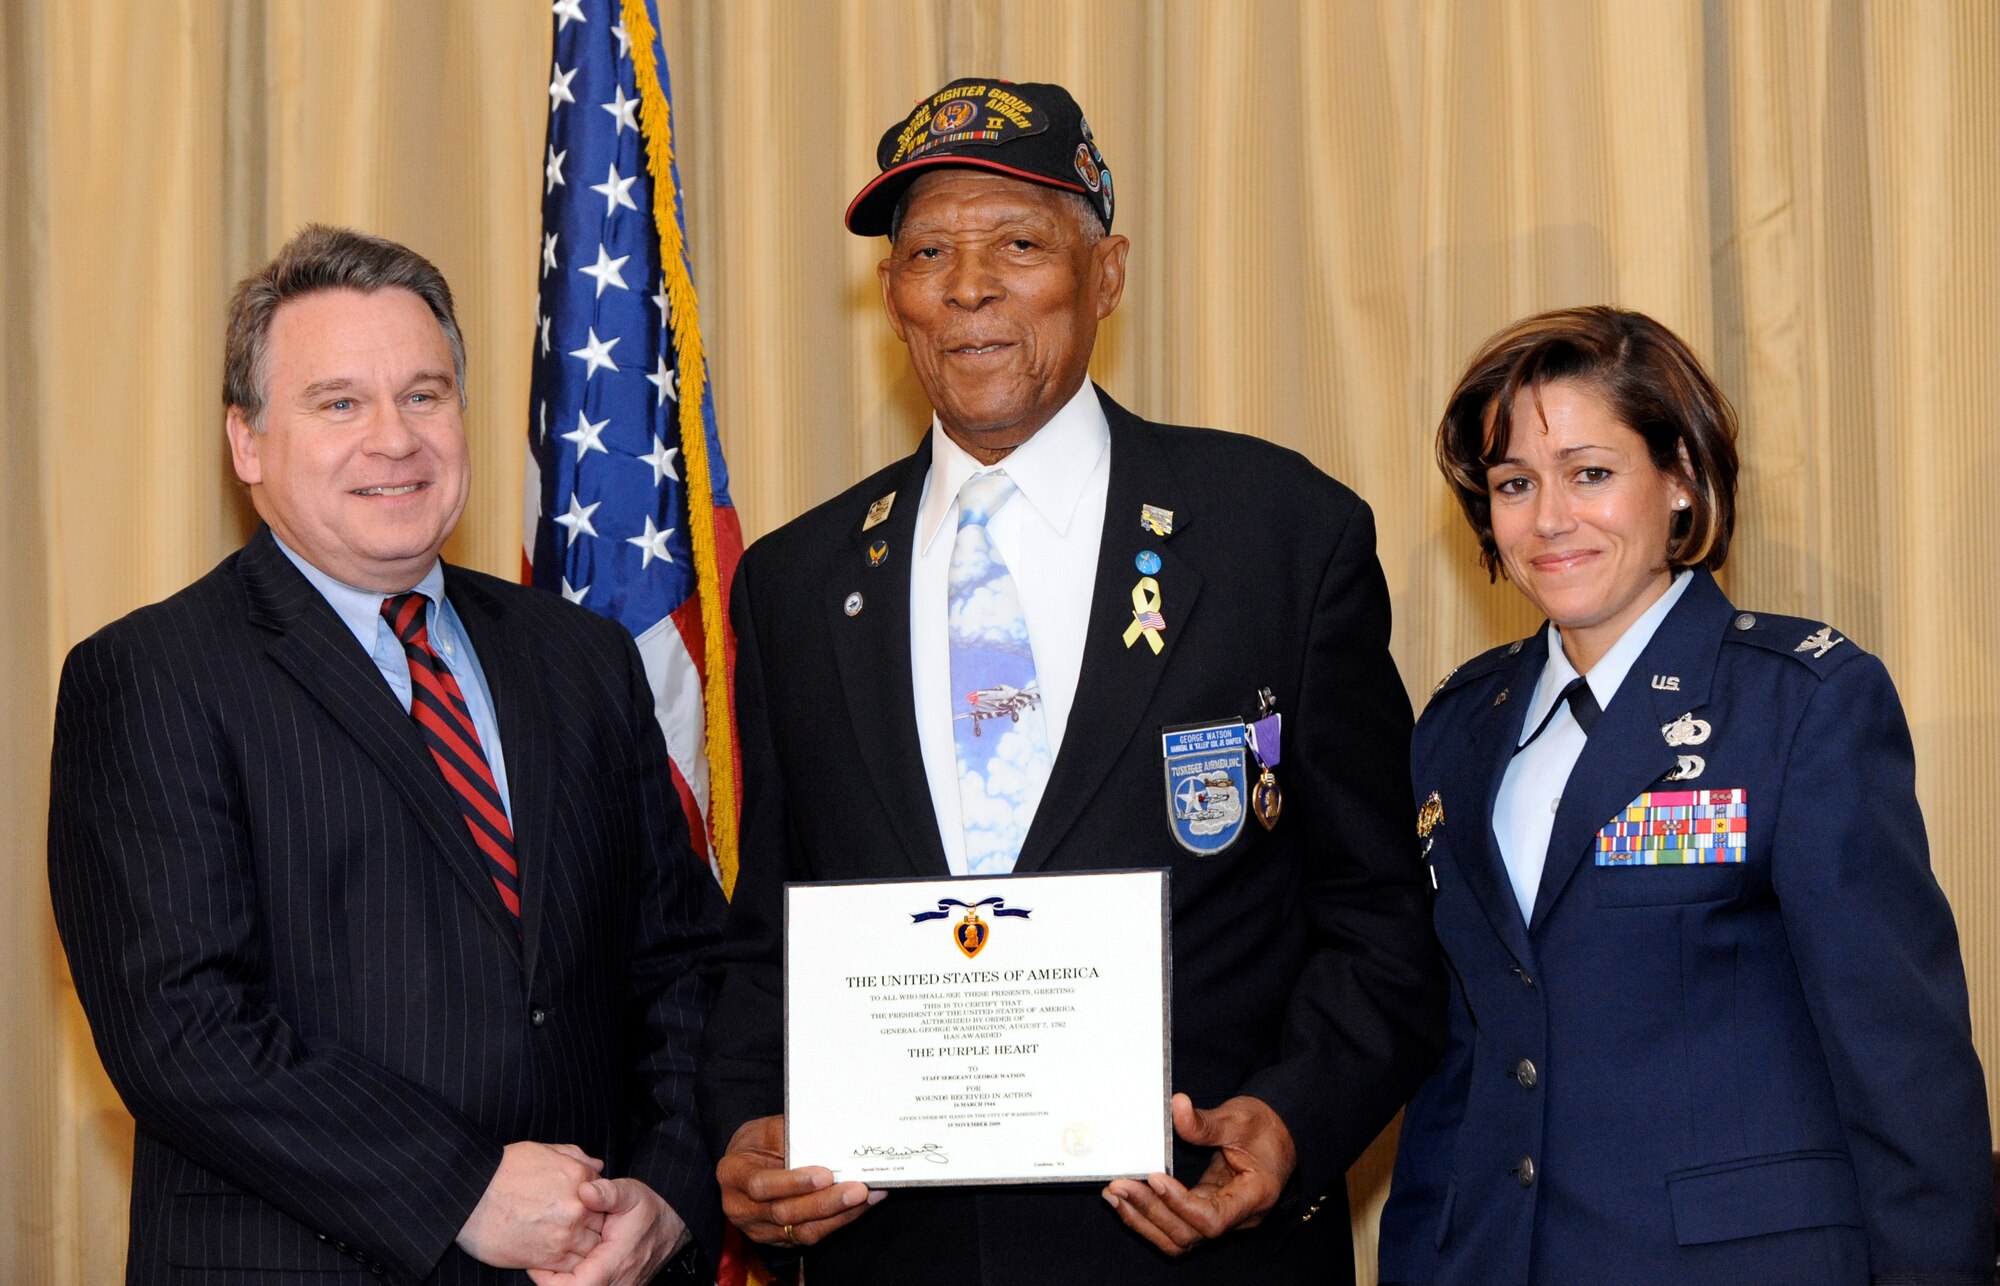 Tuskegee Airman Tech. Sgt. (Ret.) George Watson Sr. is presented the Purple Heart medal by Congressman Christopher Smith and Col. Gina M. Grosso, Joint Base McGuire-Dix-Lakehurst commander,  May10 here. He received the medal for injuries he sustained more than 66 years ago after a German air raid on his encampment near Naples, Italy. (U.S. Air Force photo/Wayne Russell)